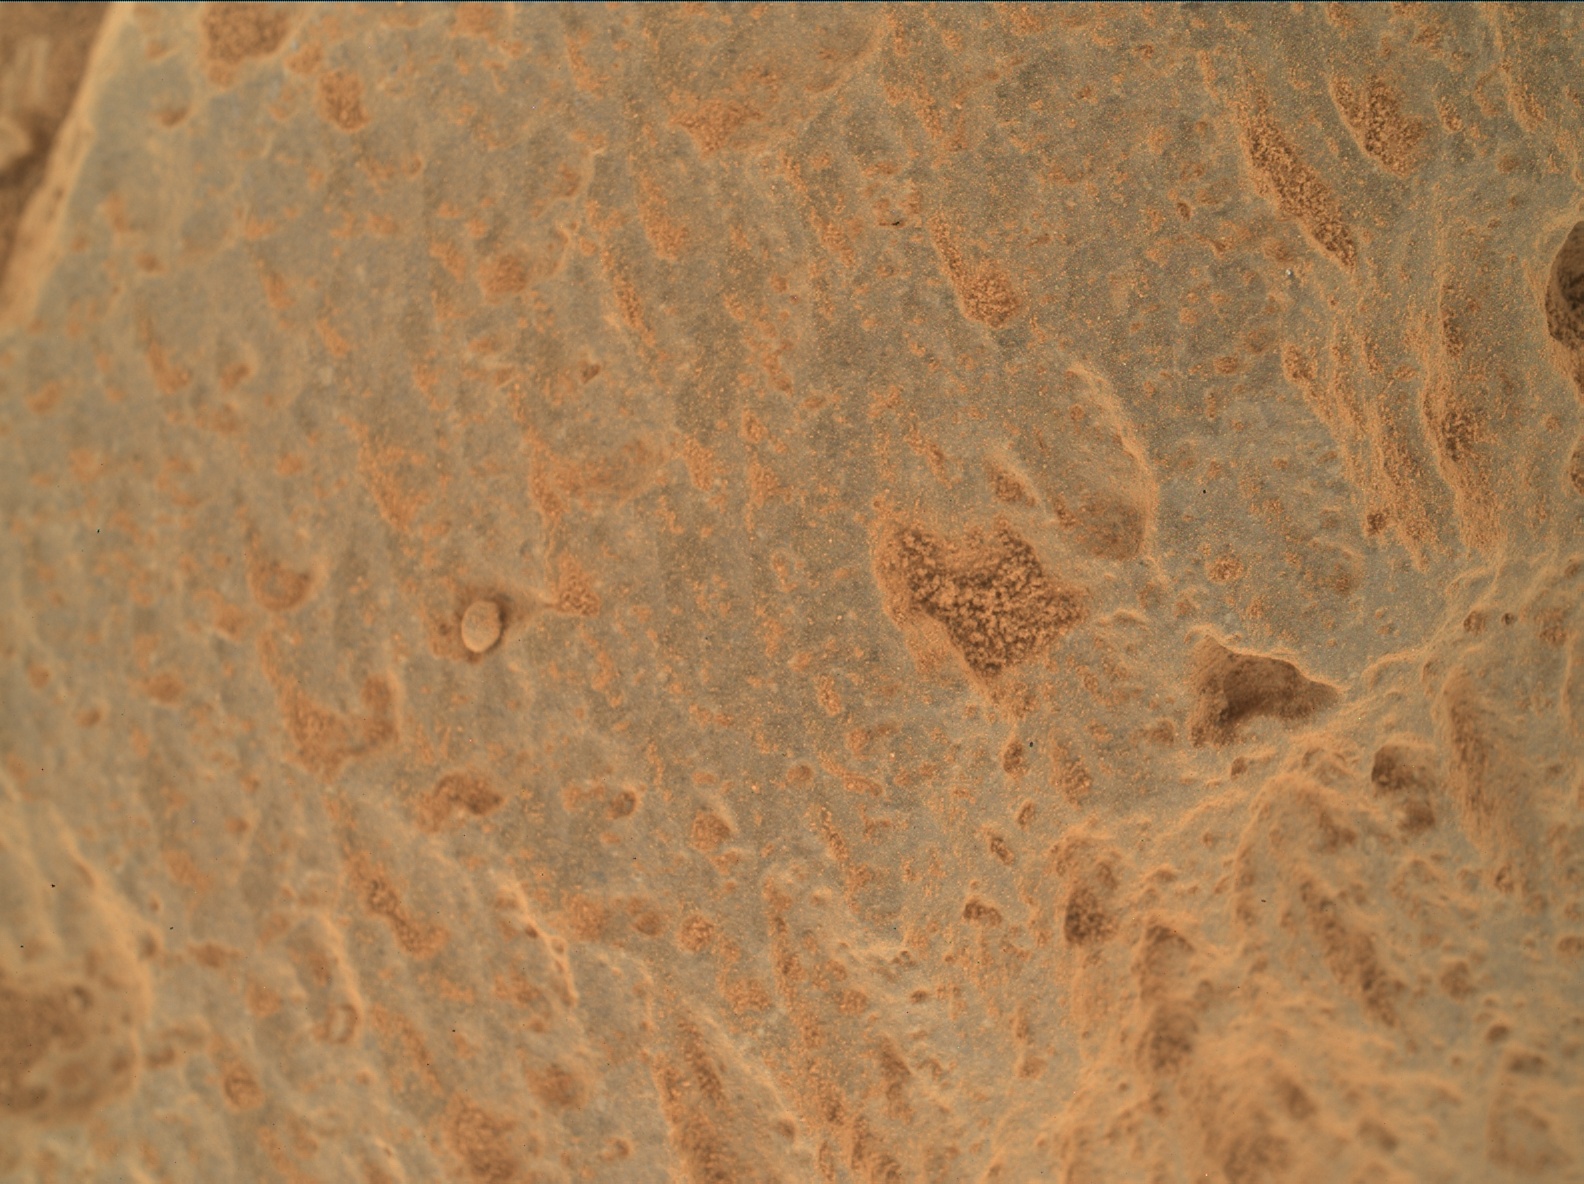 Nasa's Mars rover Curiosity acquired this image using its Mars Hand Lens Imager (MAHLI) on Sol 360